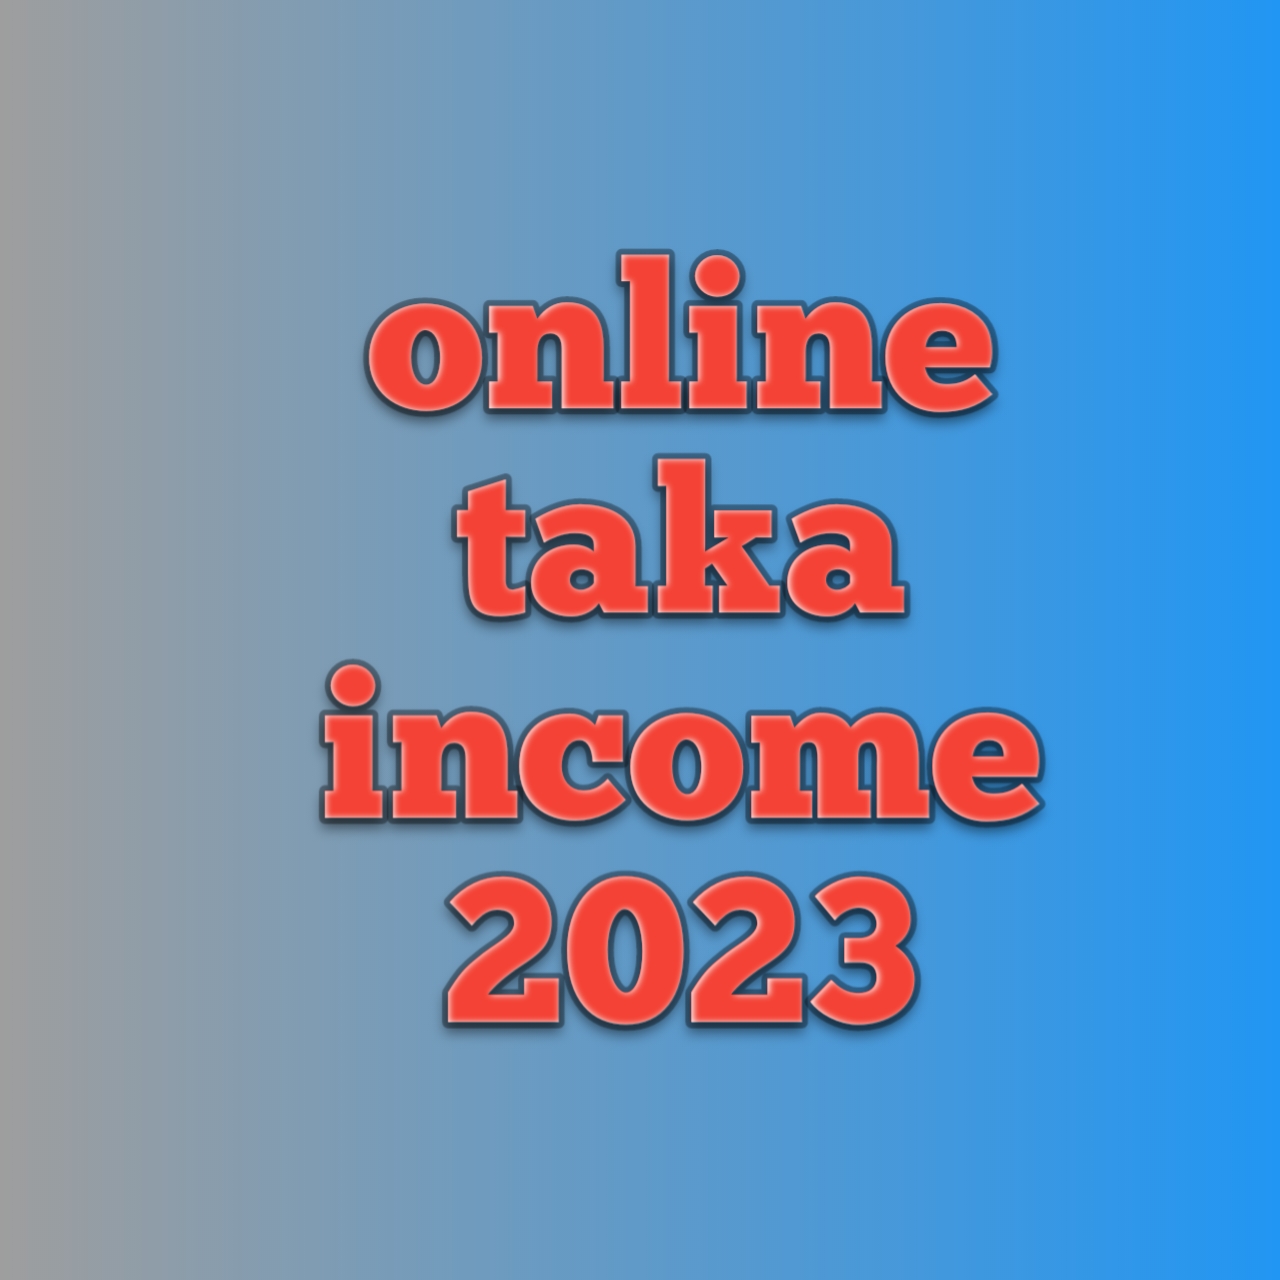 online taka income 2023, online 2023 trickwab, online taka income 2023 best tech, how to make money online 2023, online income bd 2023, earn money online 2023